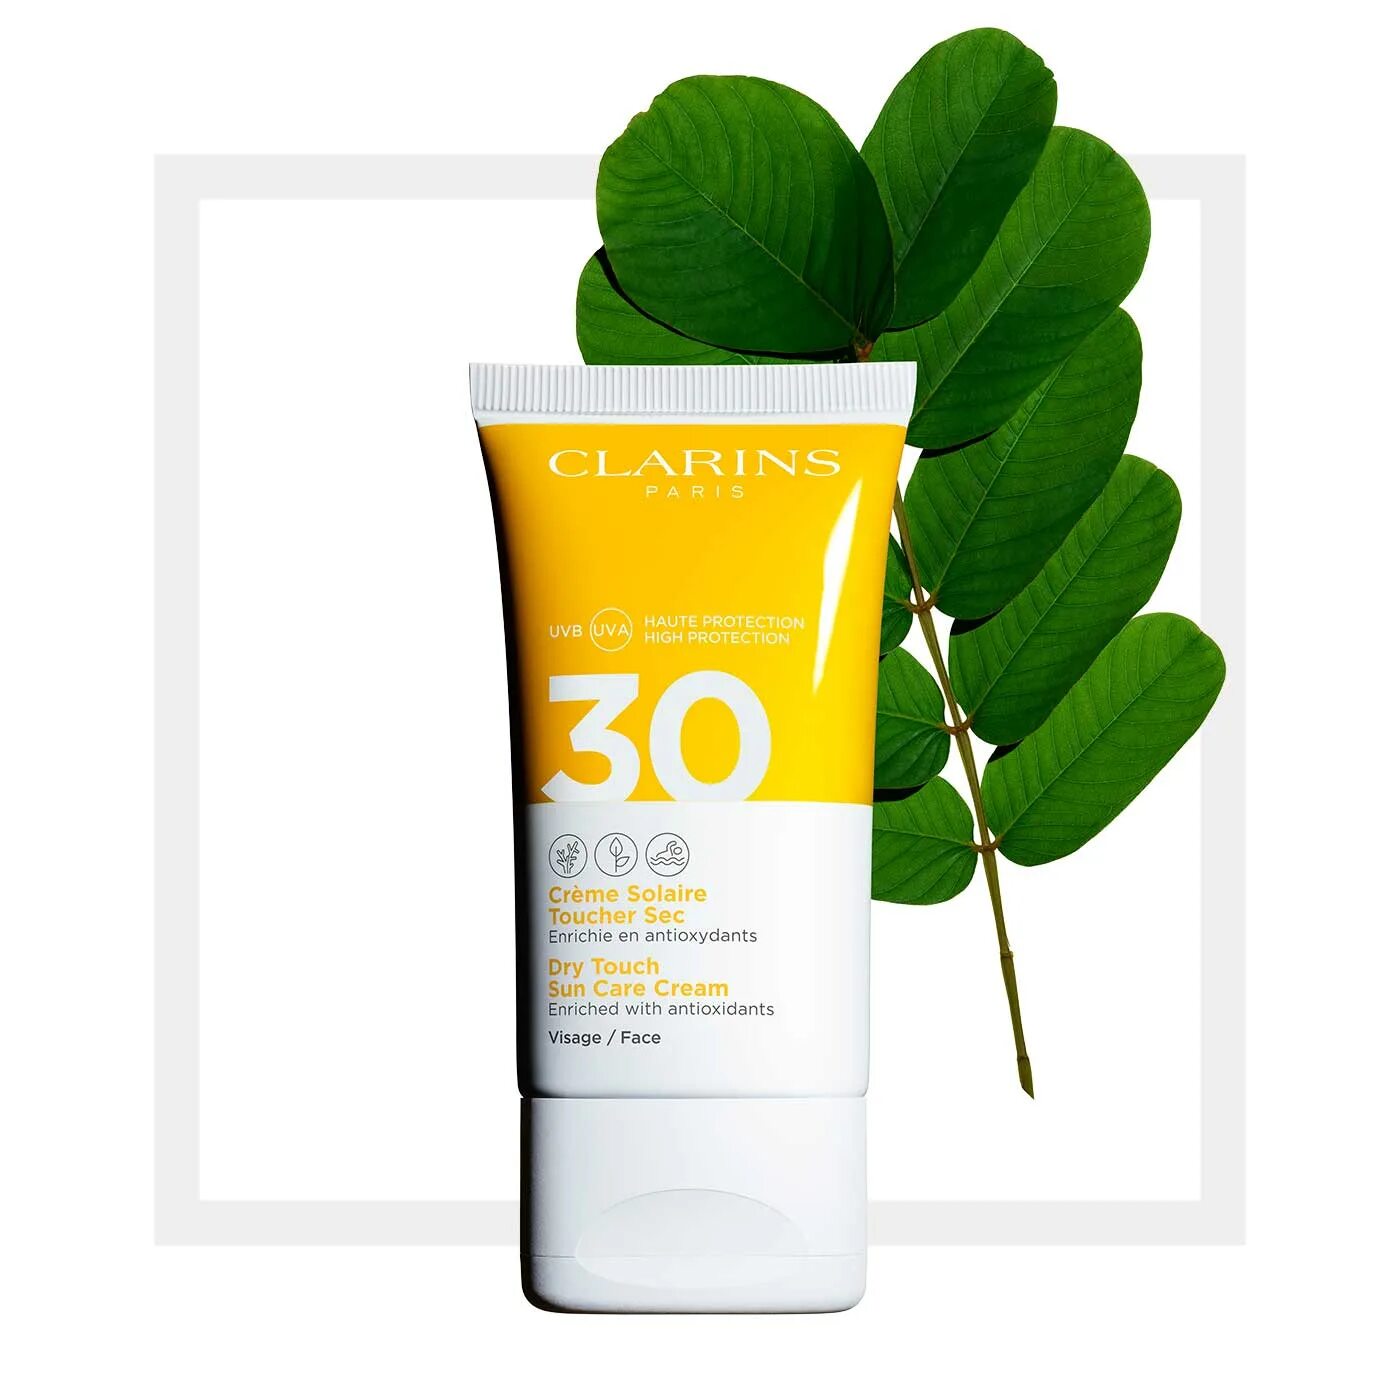 Creme solaire spf30. Солнцезащитный крем Cream SPF 30. Clarins Sun Care Dry Touch SPF 50. Солнцезащитный SPF 50 Klairs.